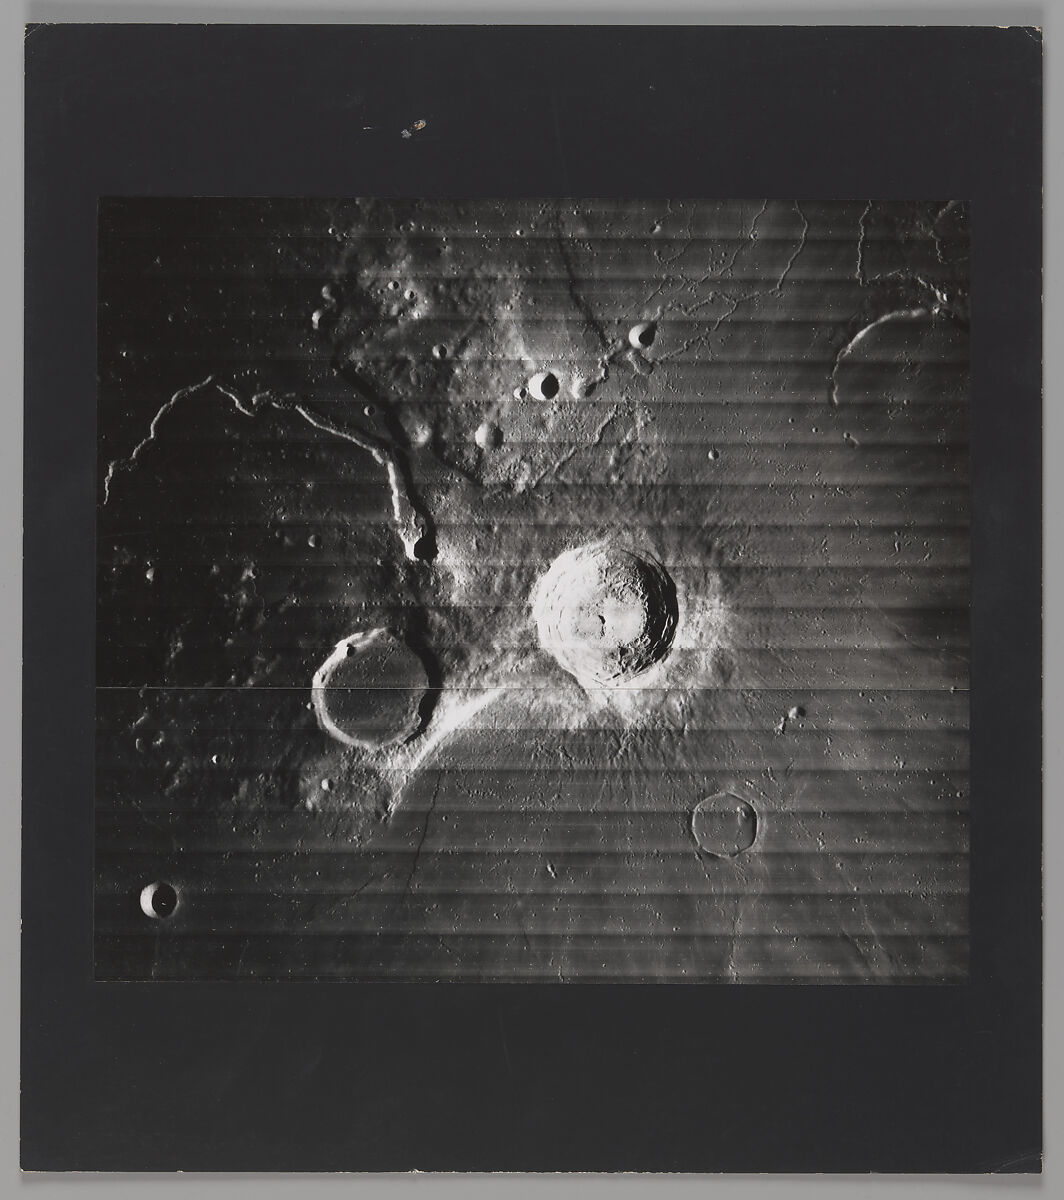 Crater Aristarchus, Schroter's Valley, and Vicinity, National Aeronautics and Space Administration (NASA), Gelatin silver prints 